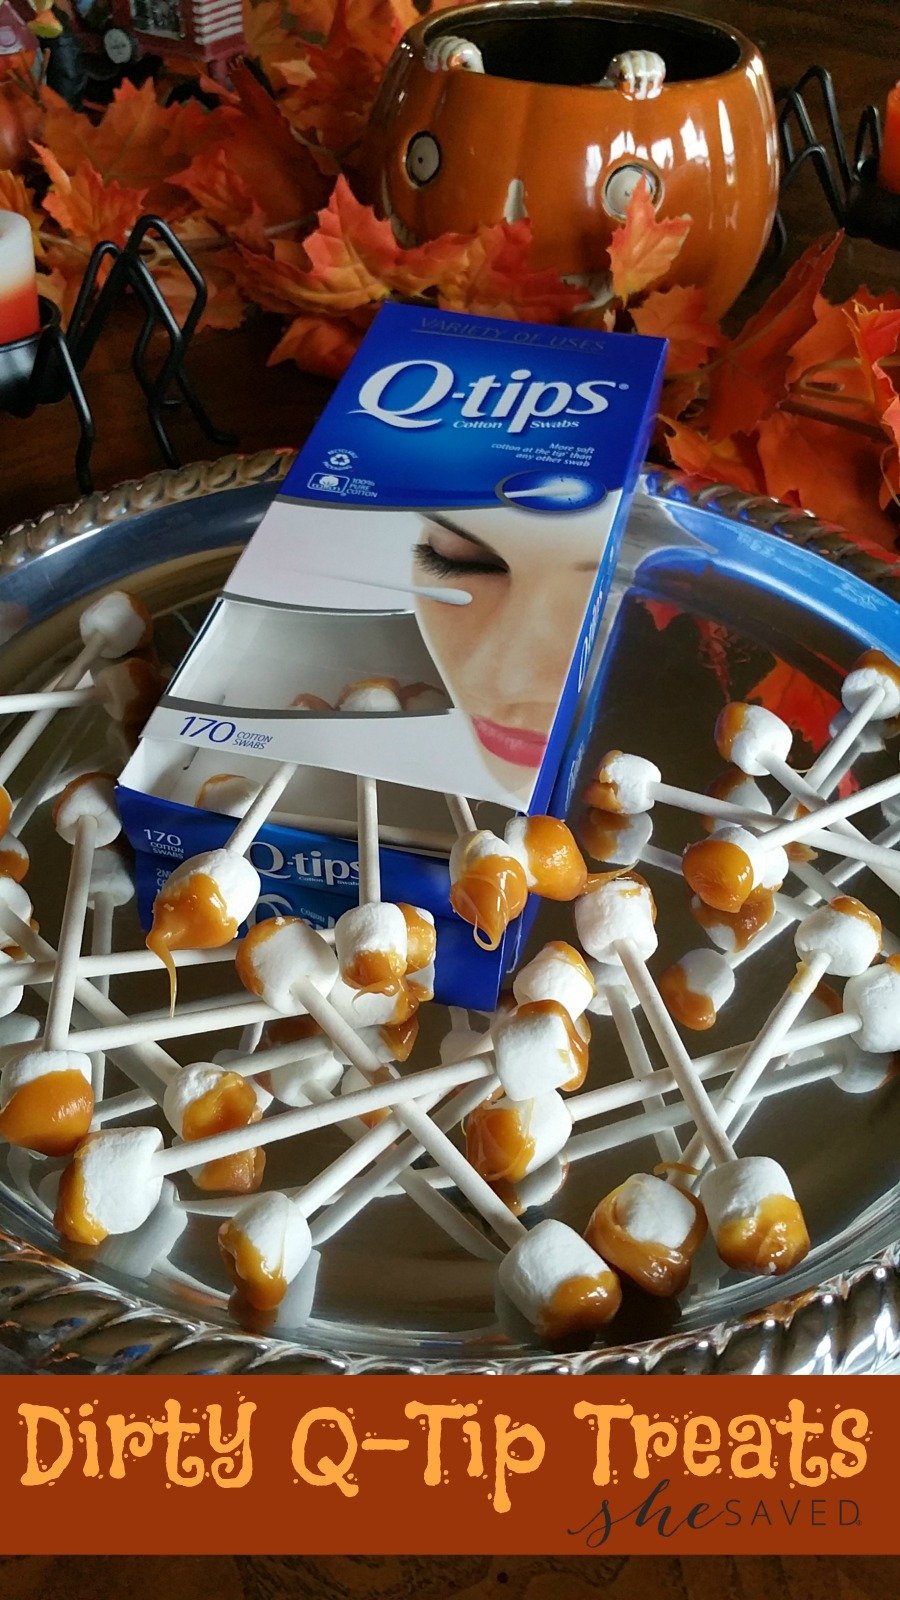 Looking for a GROSS treat idea for Halloween? These super gross Dirty Q-Tip Treats should do the job! Ick!! 